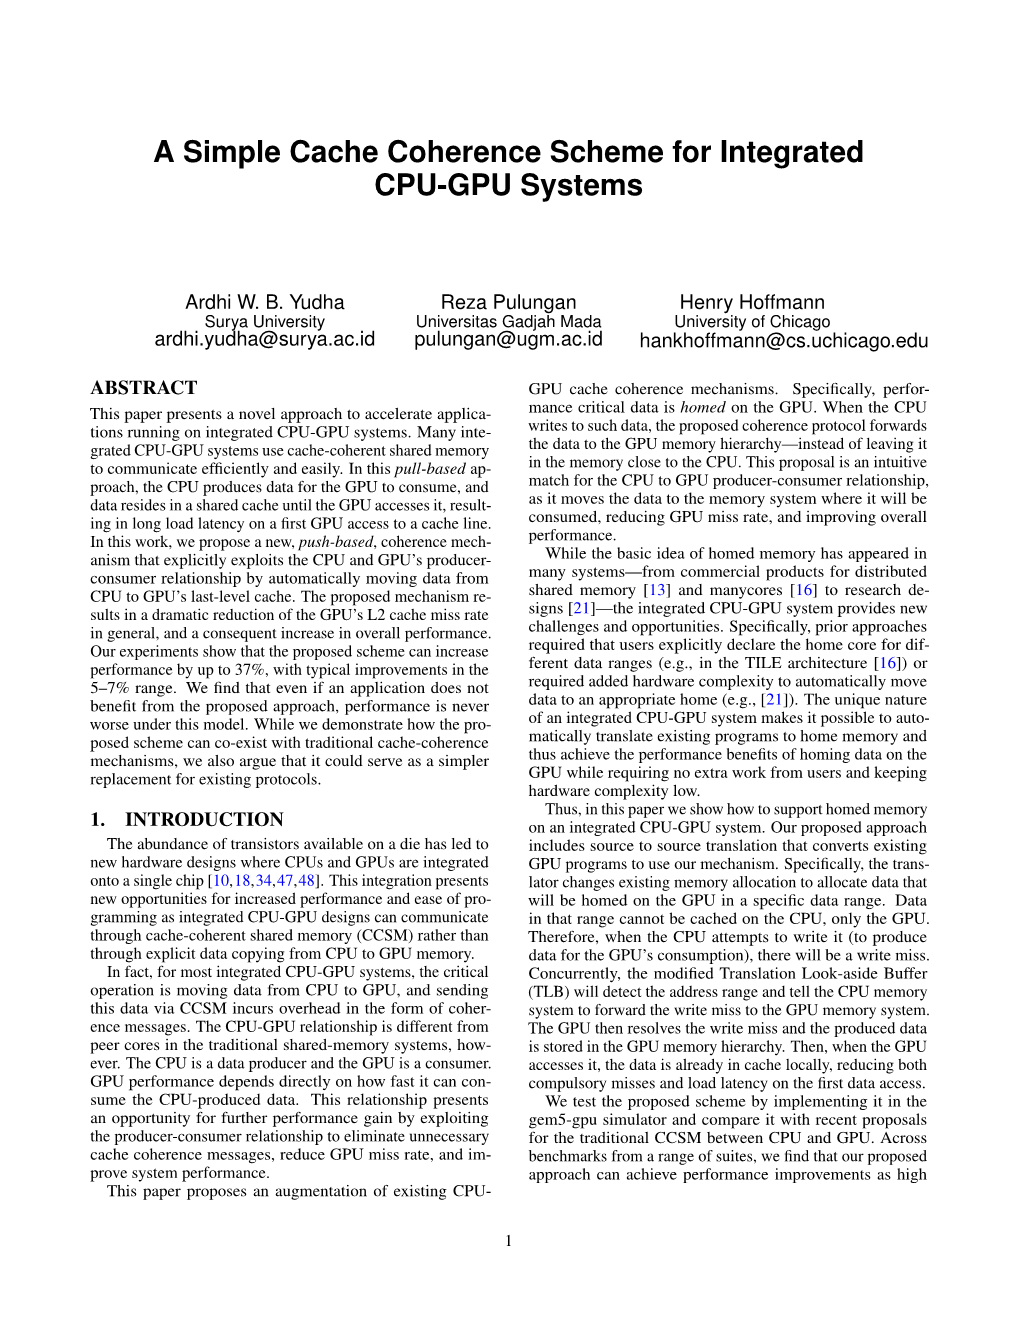 A Simple Cache Coherence Scheme for Integrated CPU-GPU Systems